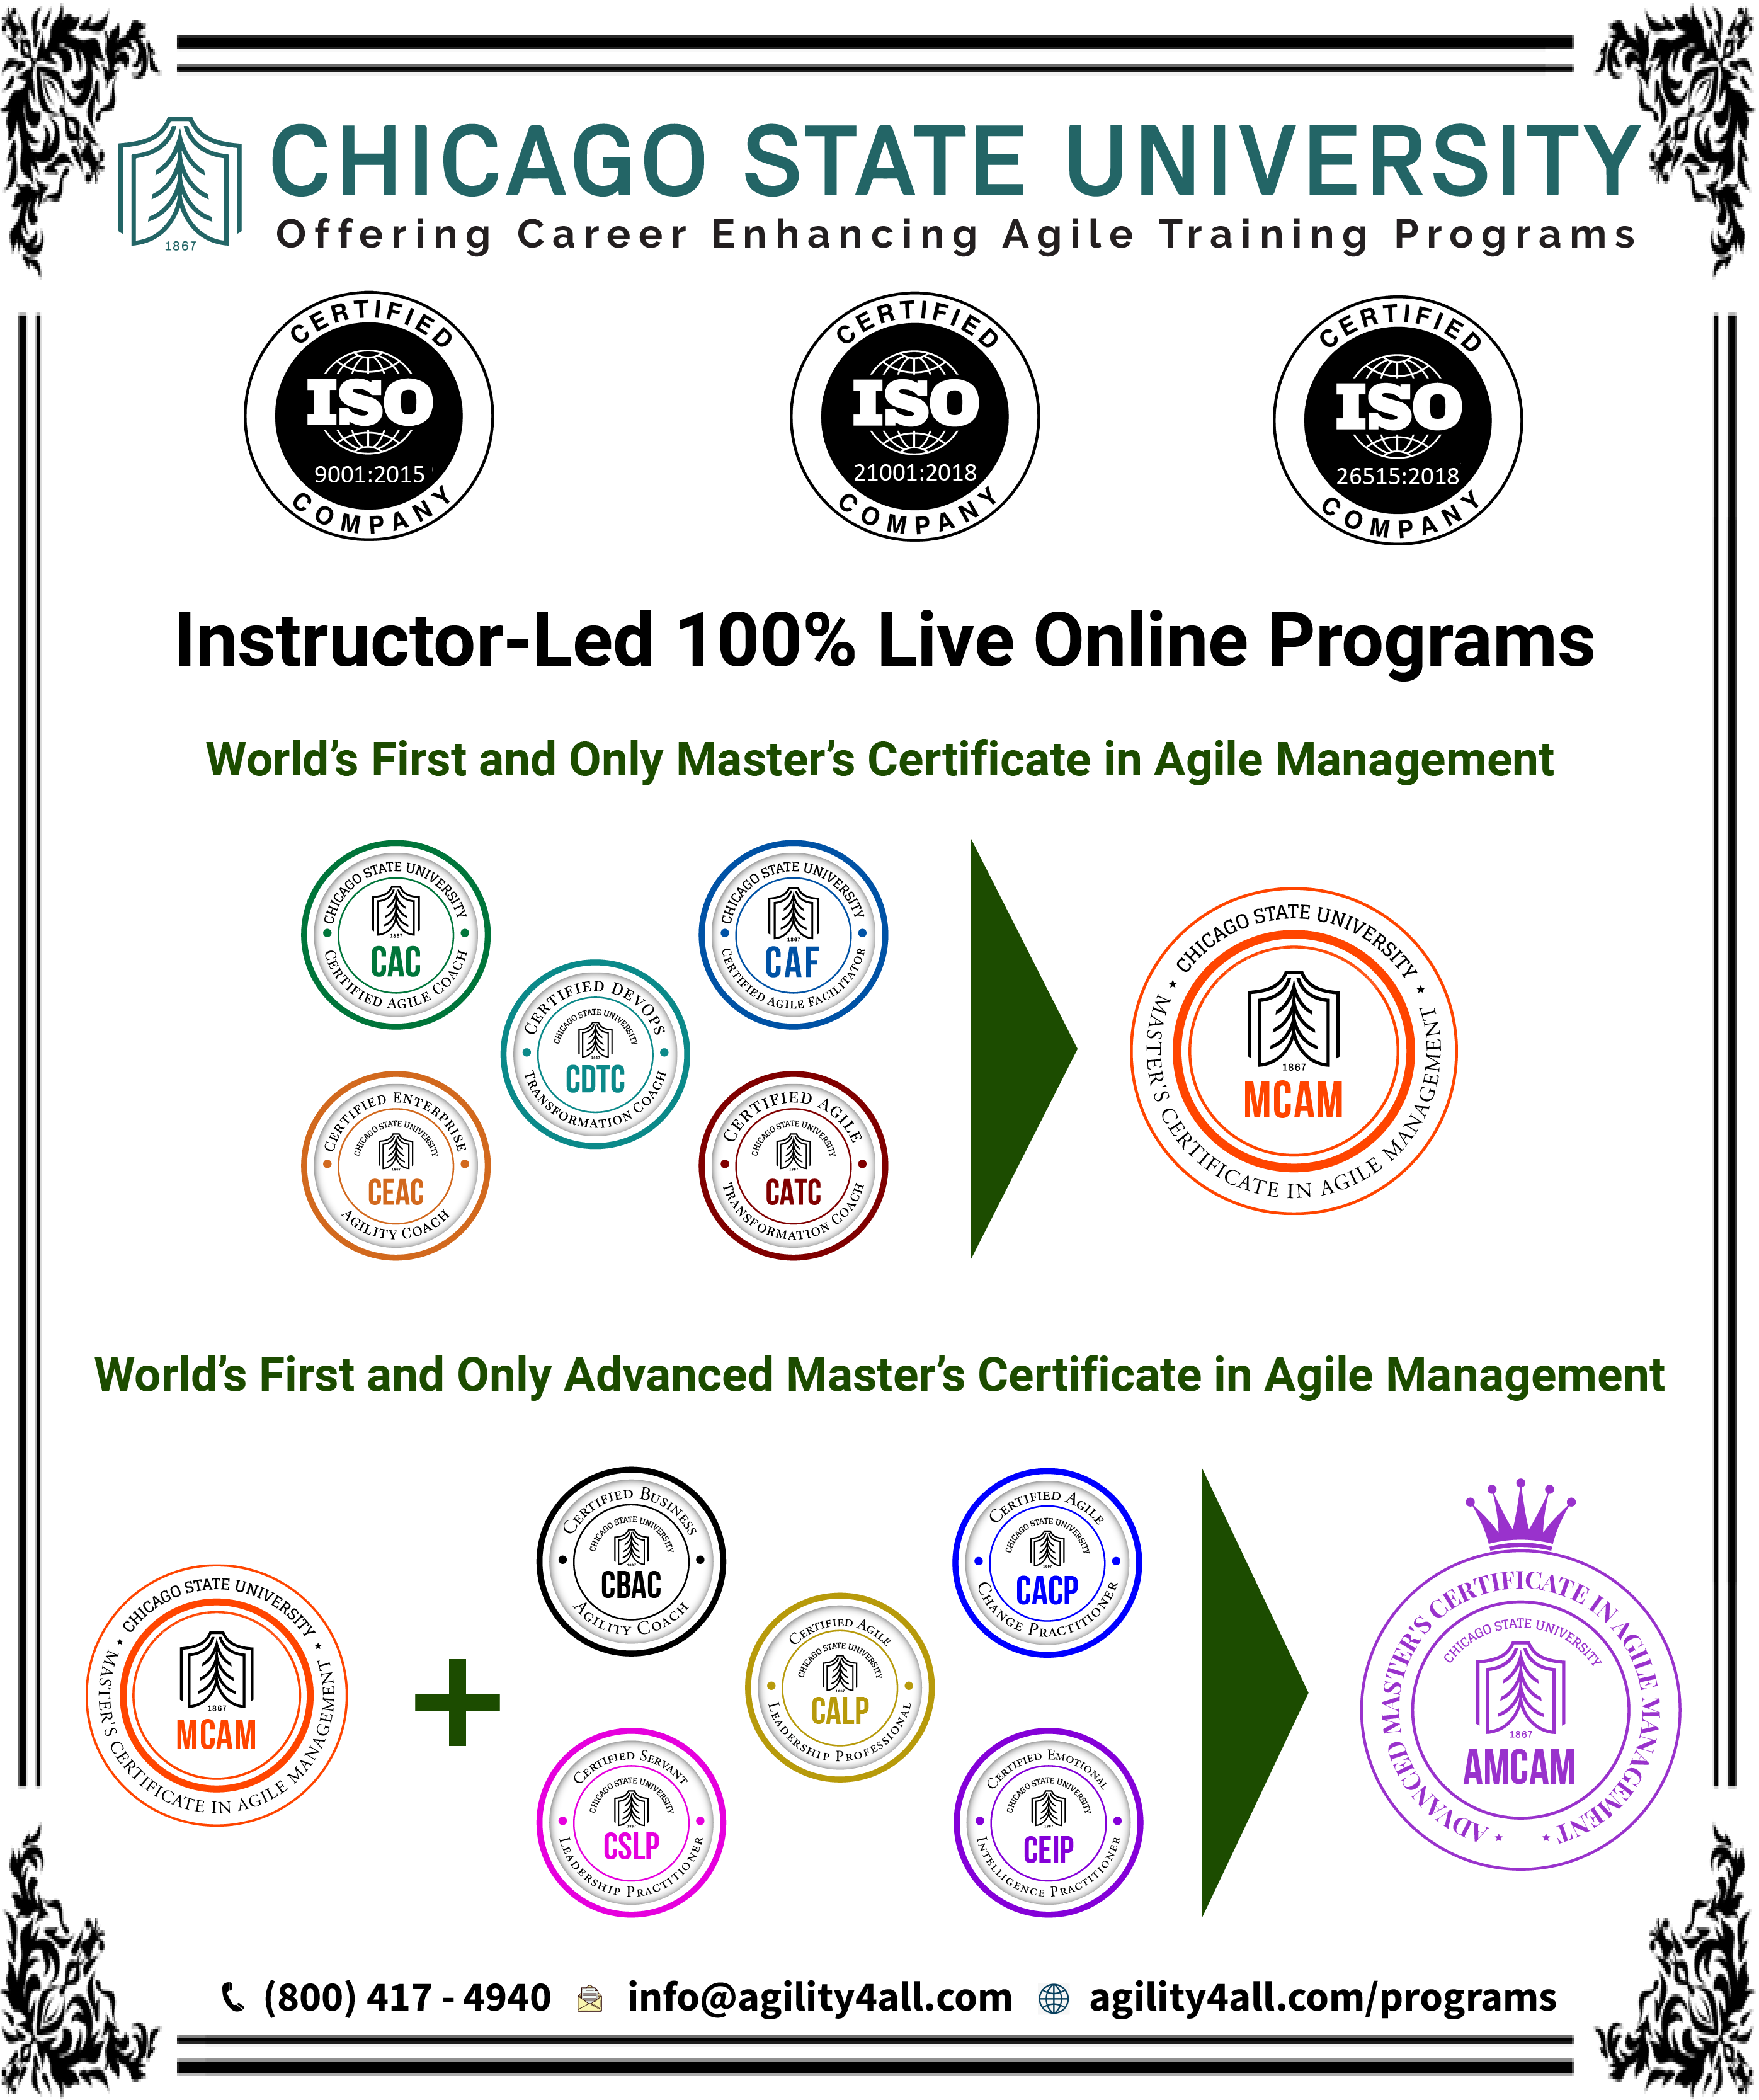 Certified Agile Coach (CAC) from Chicago State University 